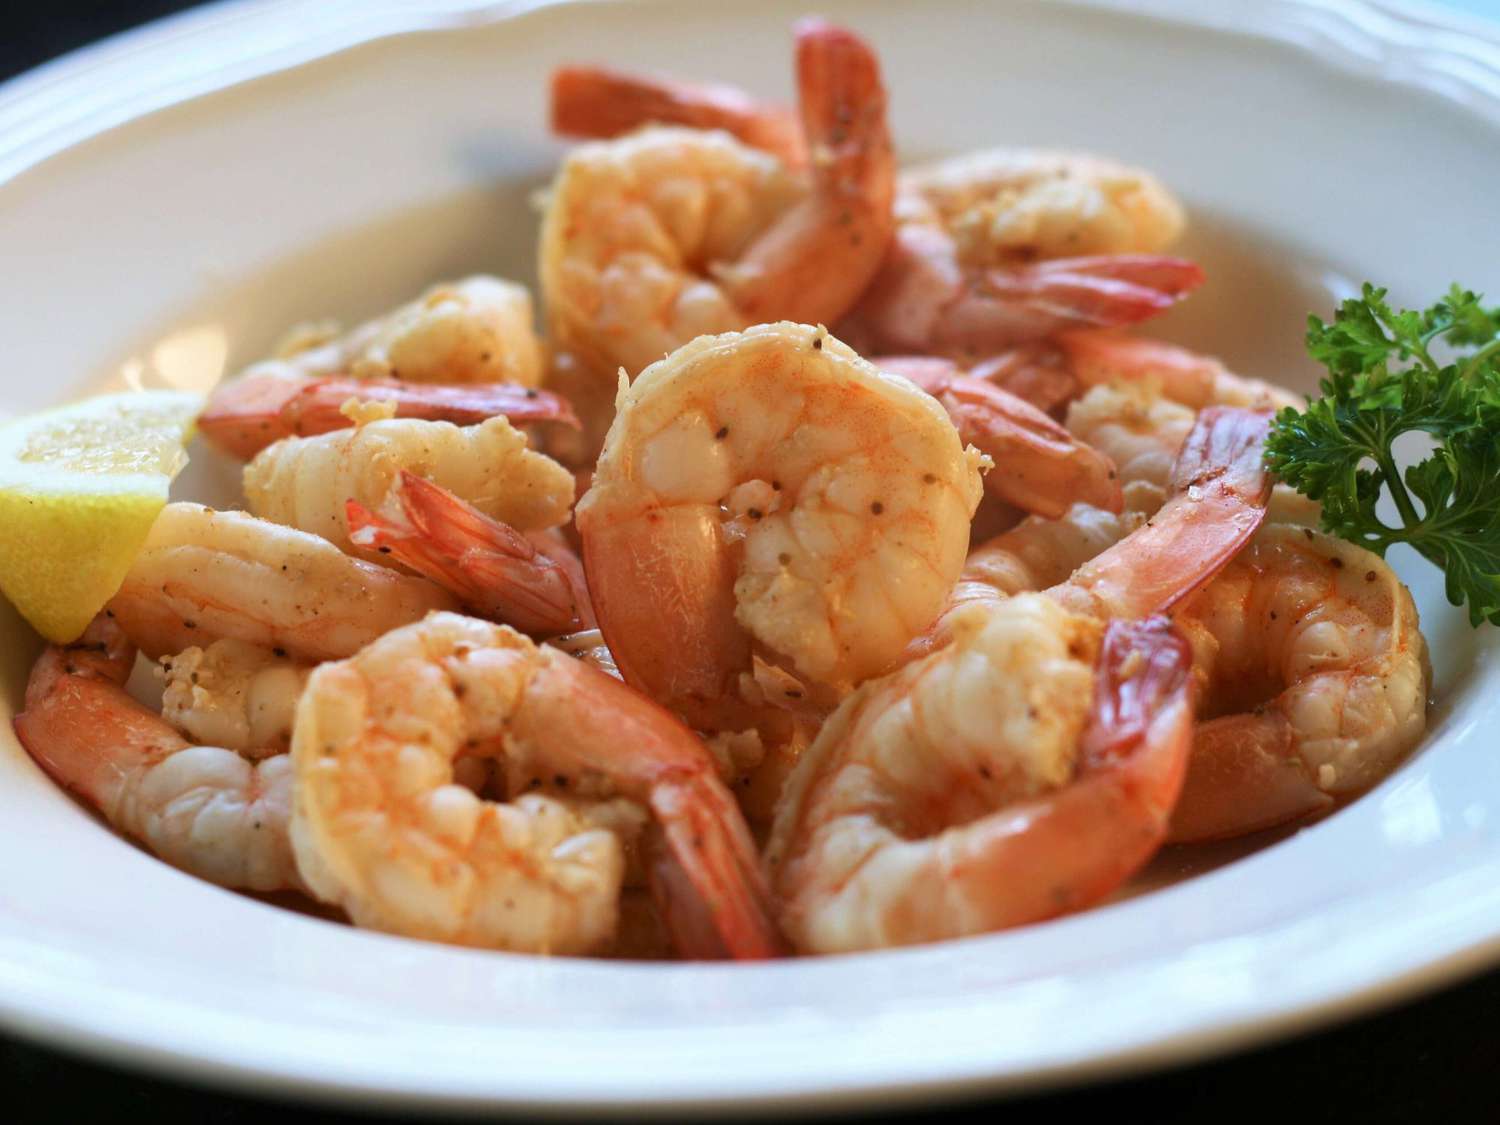 Steamed shrimp in a plate